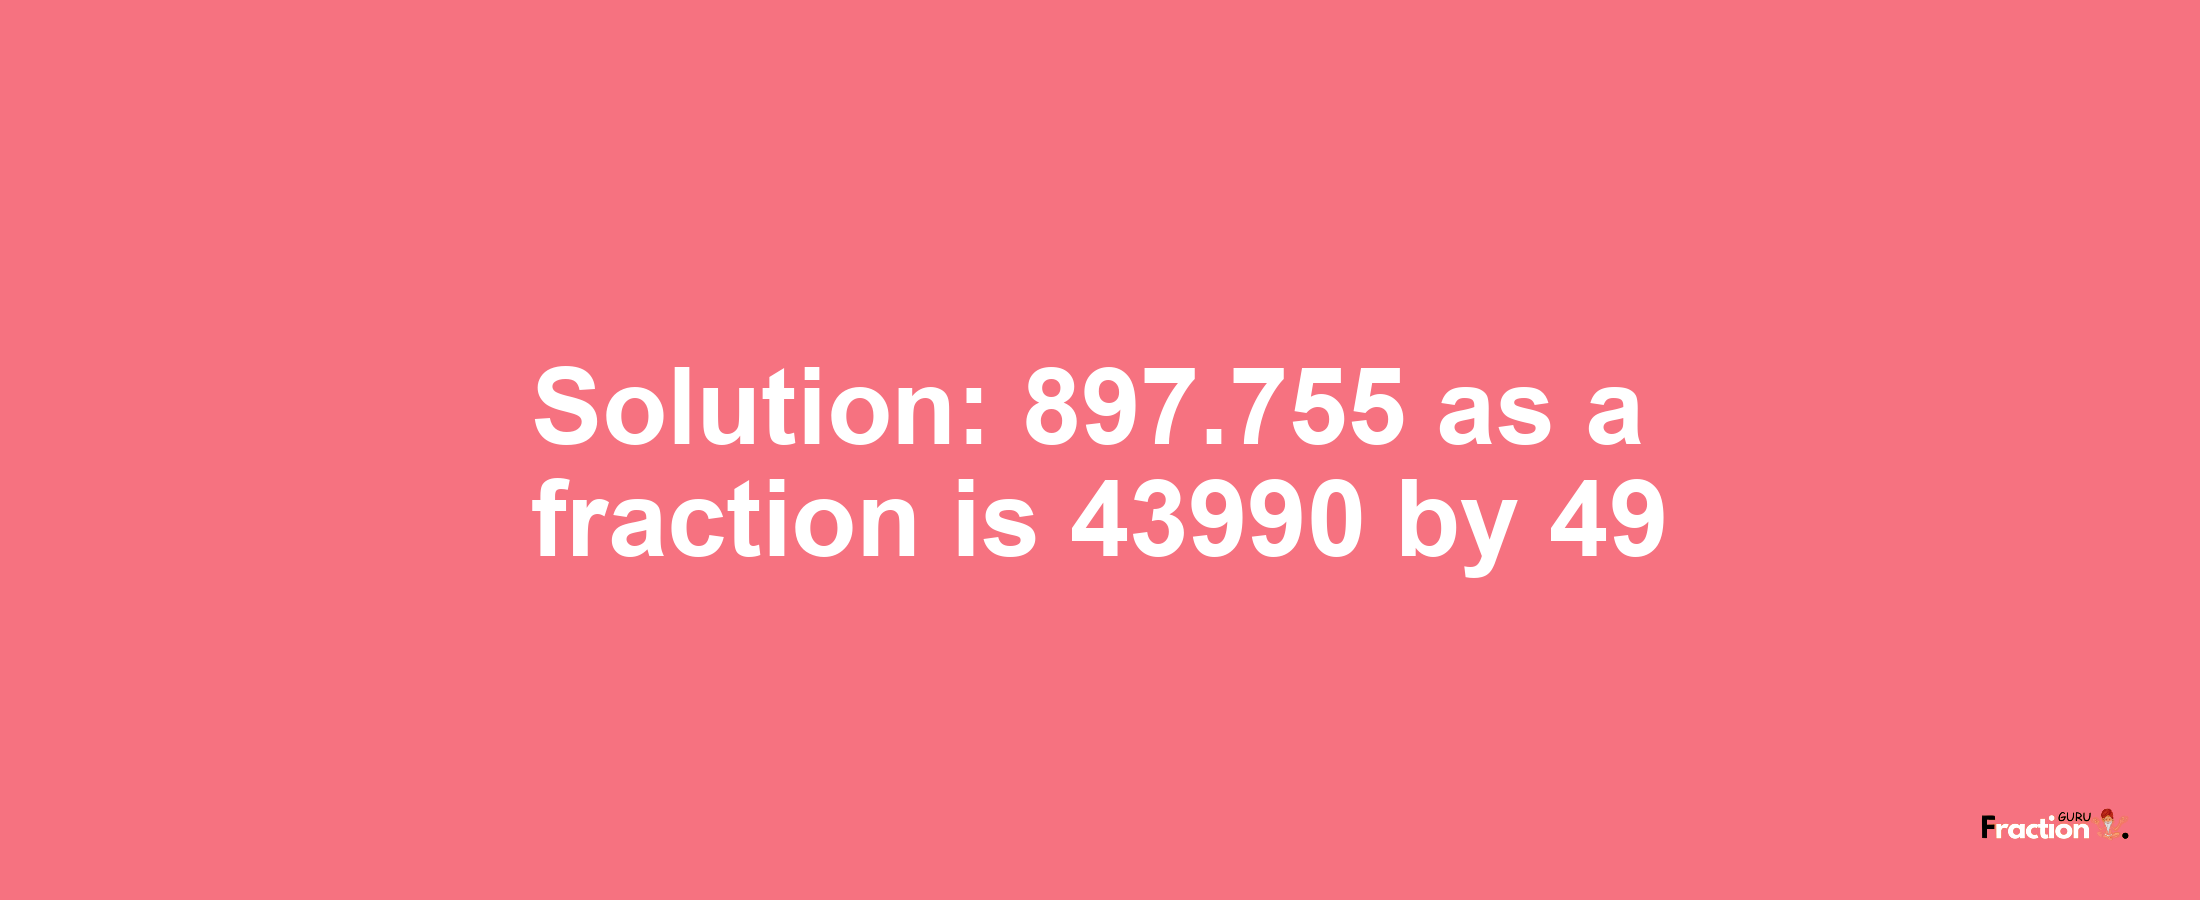 Solution:897.755 as a fraction is 43990/49